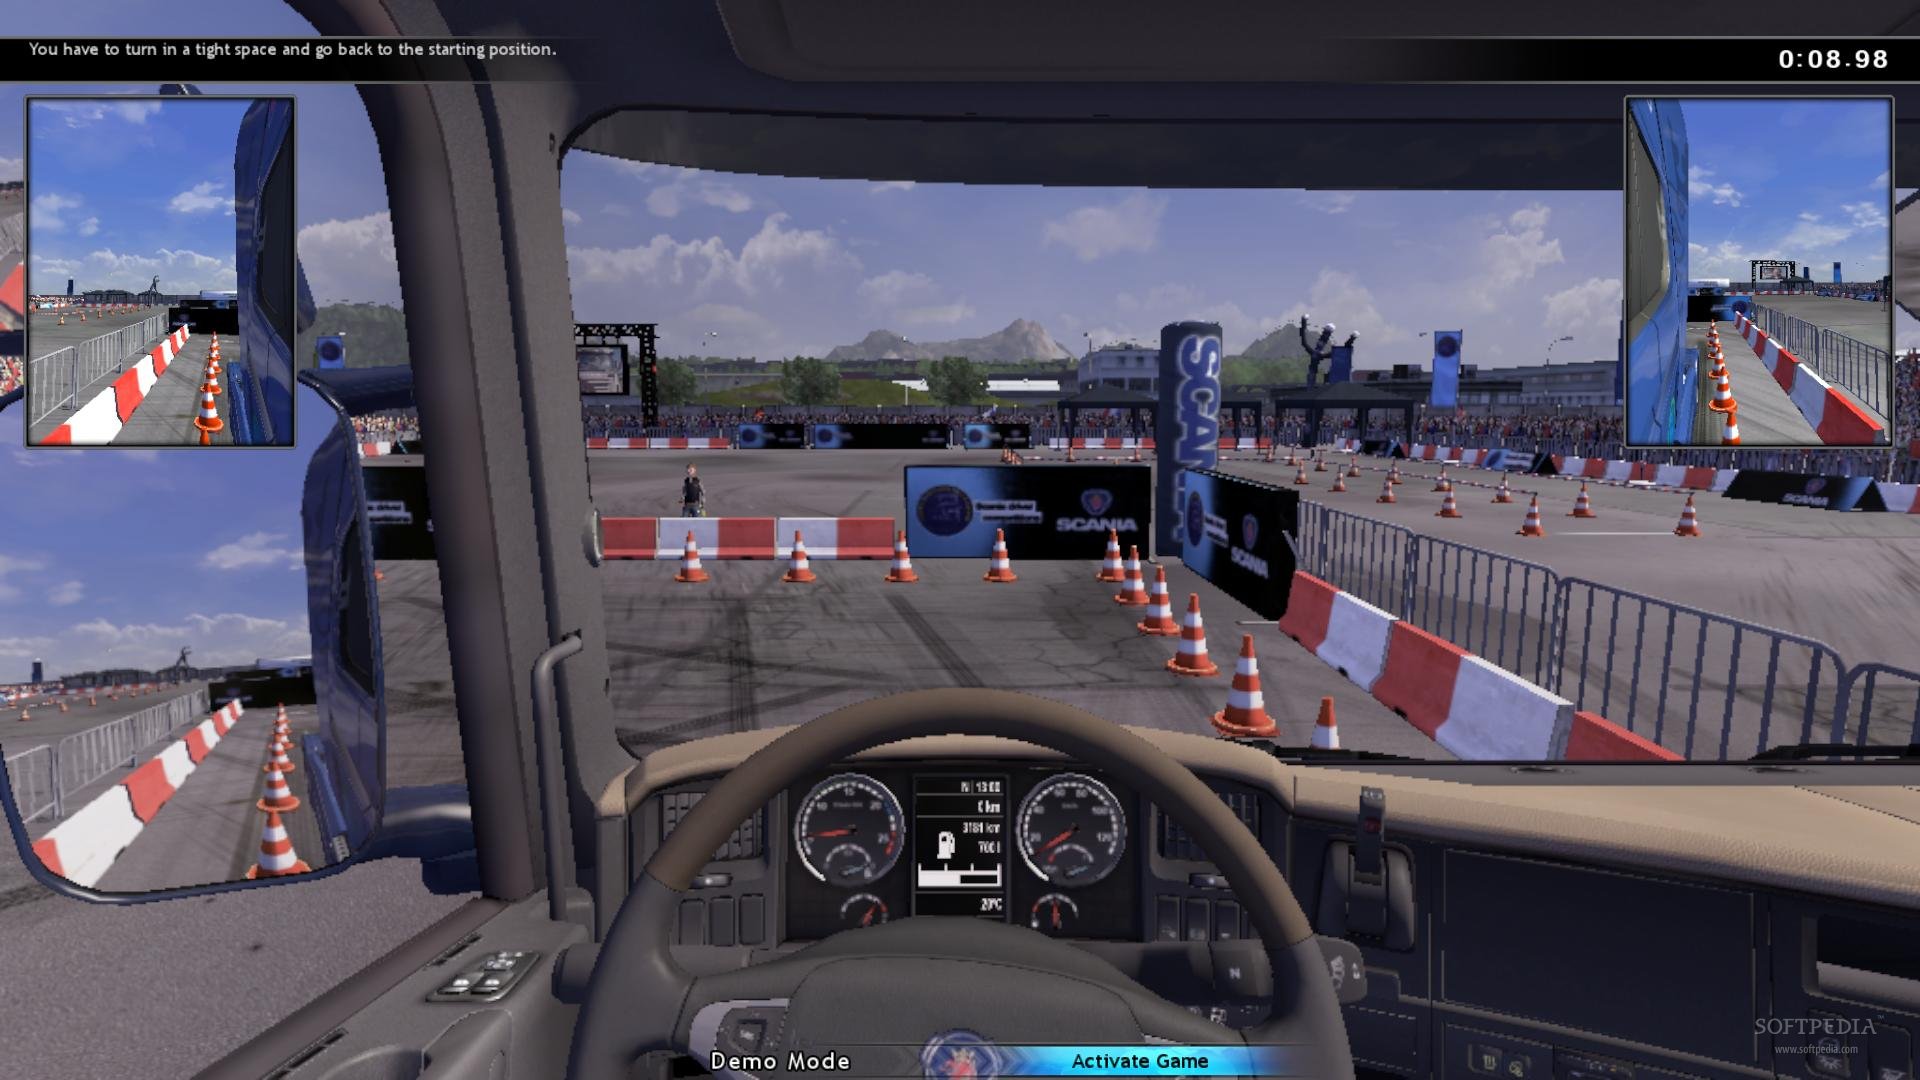 download scania driver game